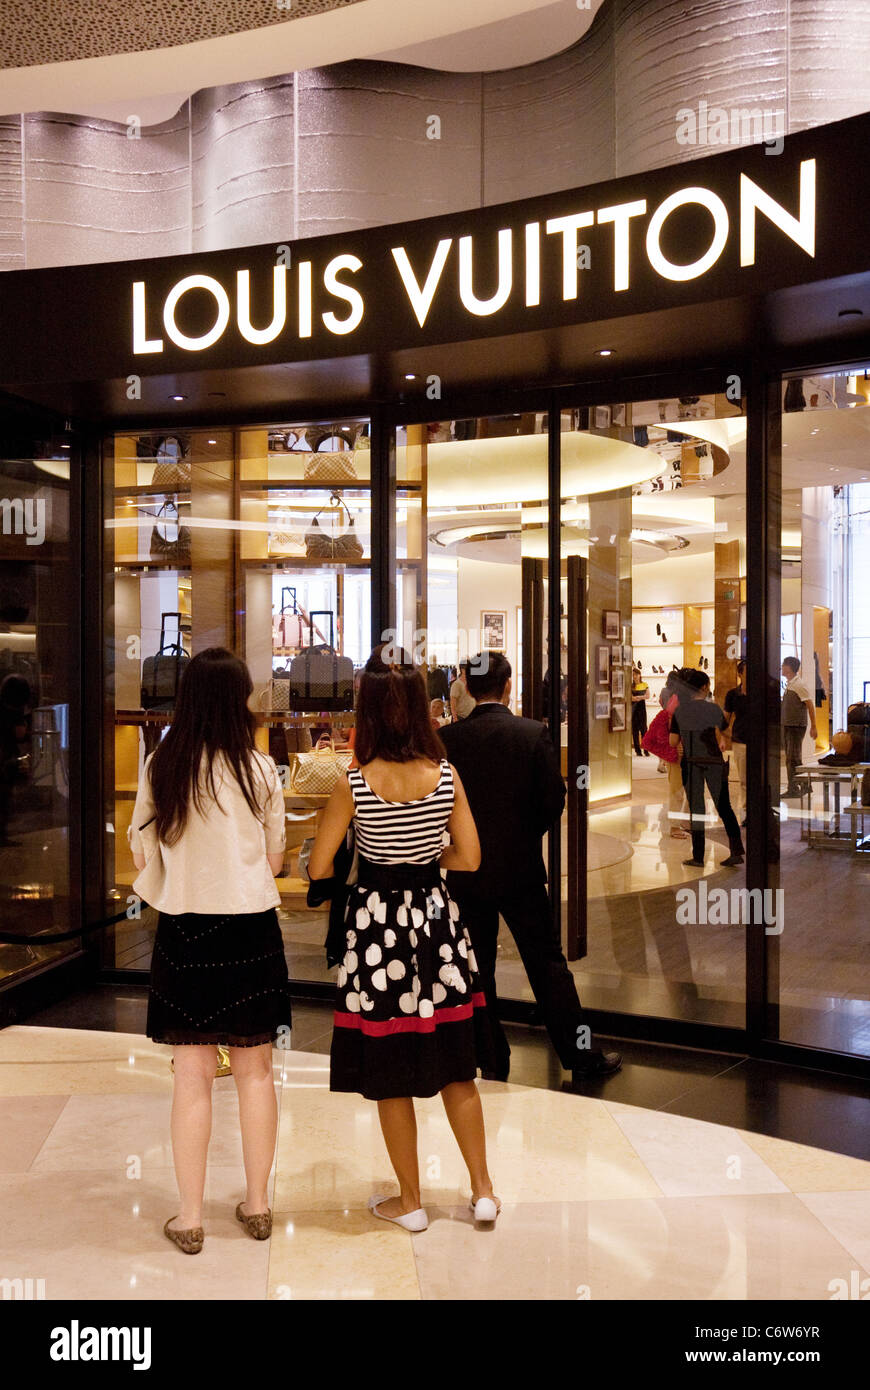 Louis Vuitton Singapore High Resolution Stock Photography and Images - Alamy